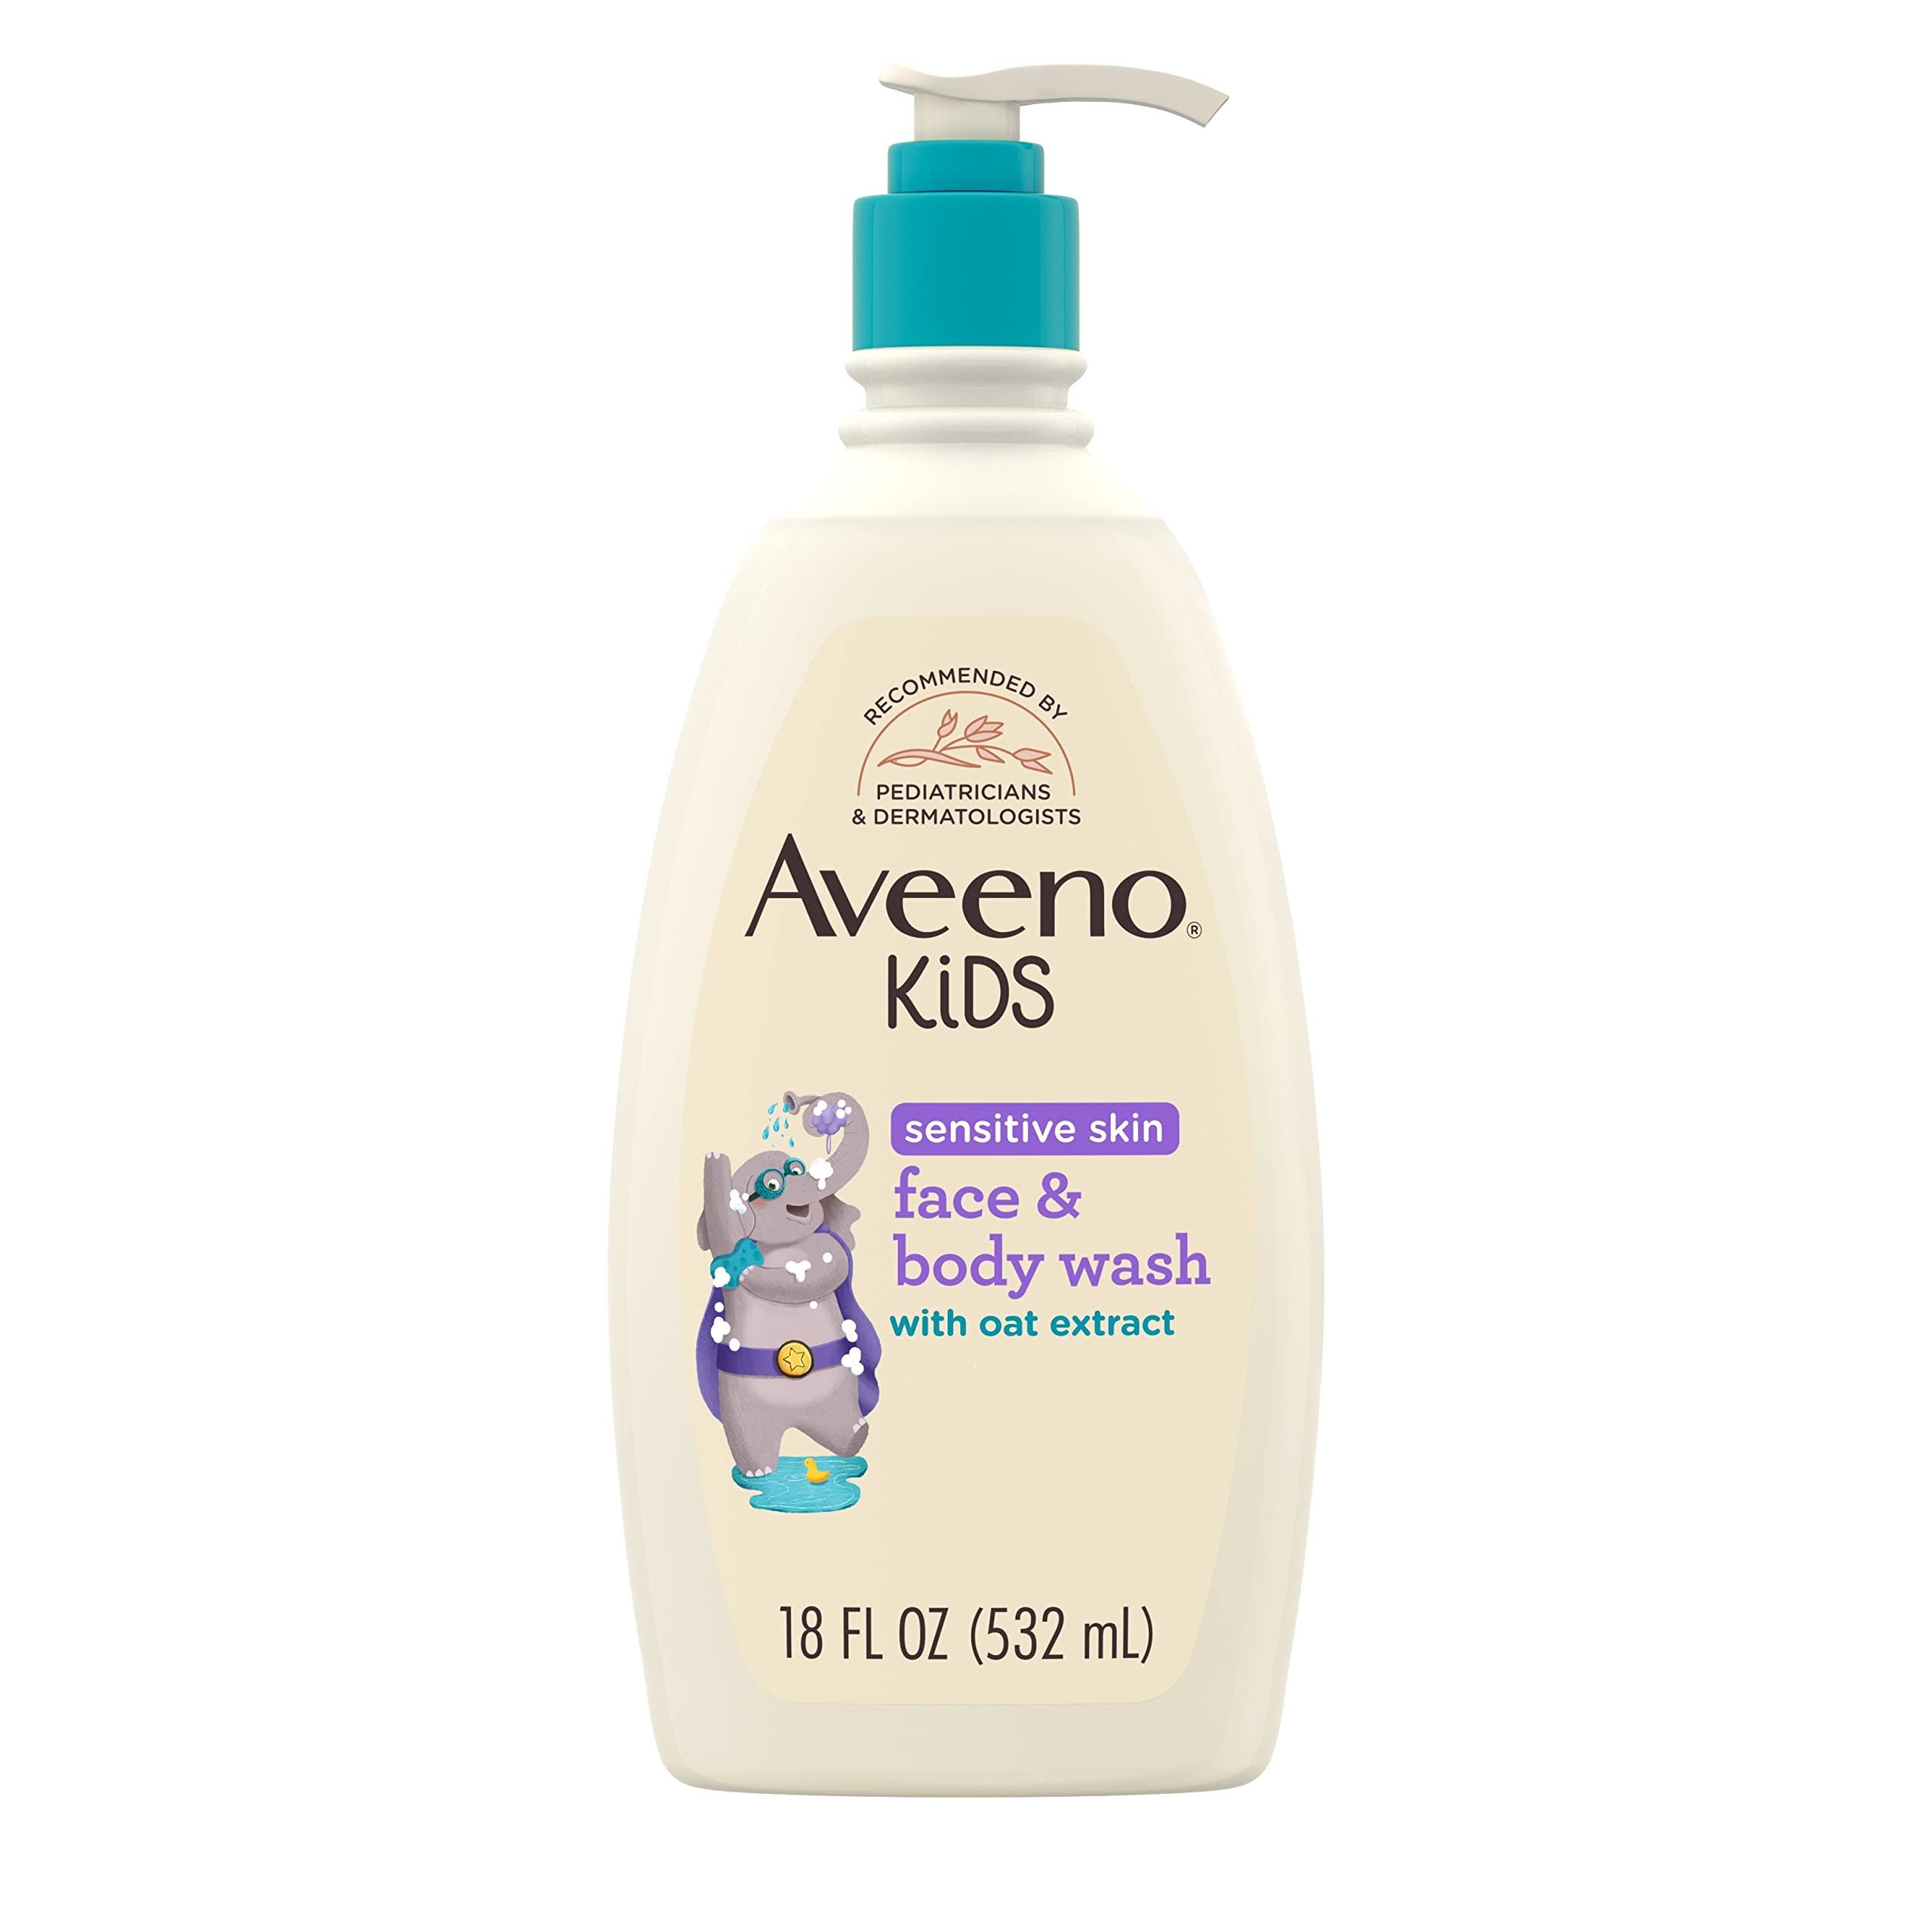 18-Oz Aveeno Kids Sensitive Skin Face & Body Wash w/ Oat Extract (Tear-Free & Hypoallergenic) $6.25 + Free Shipping w/ Prime or on $35+